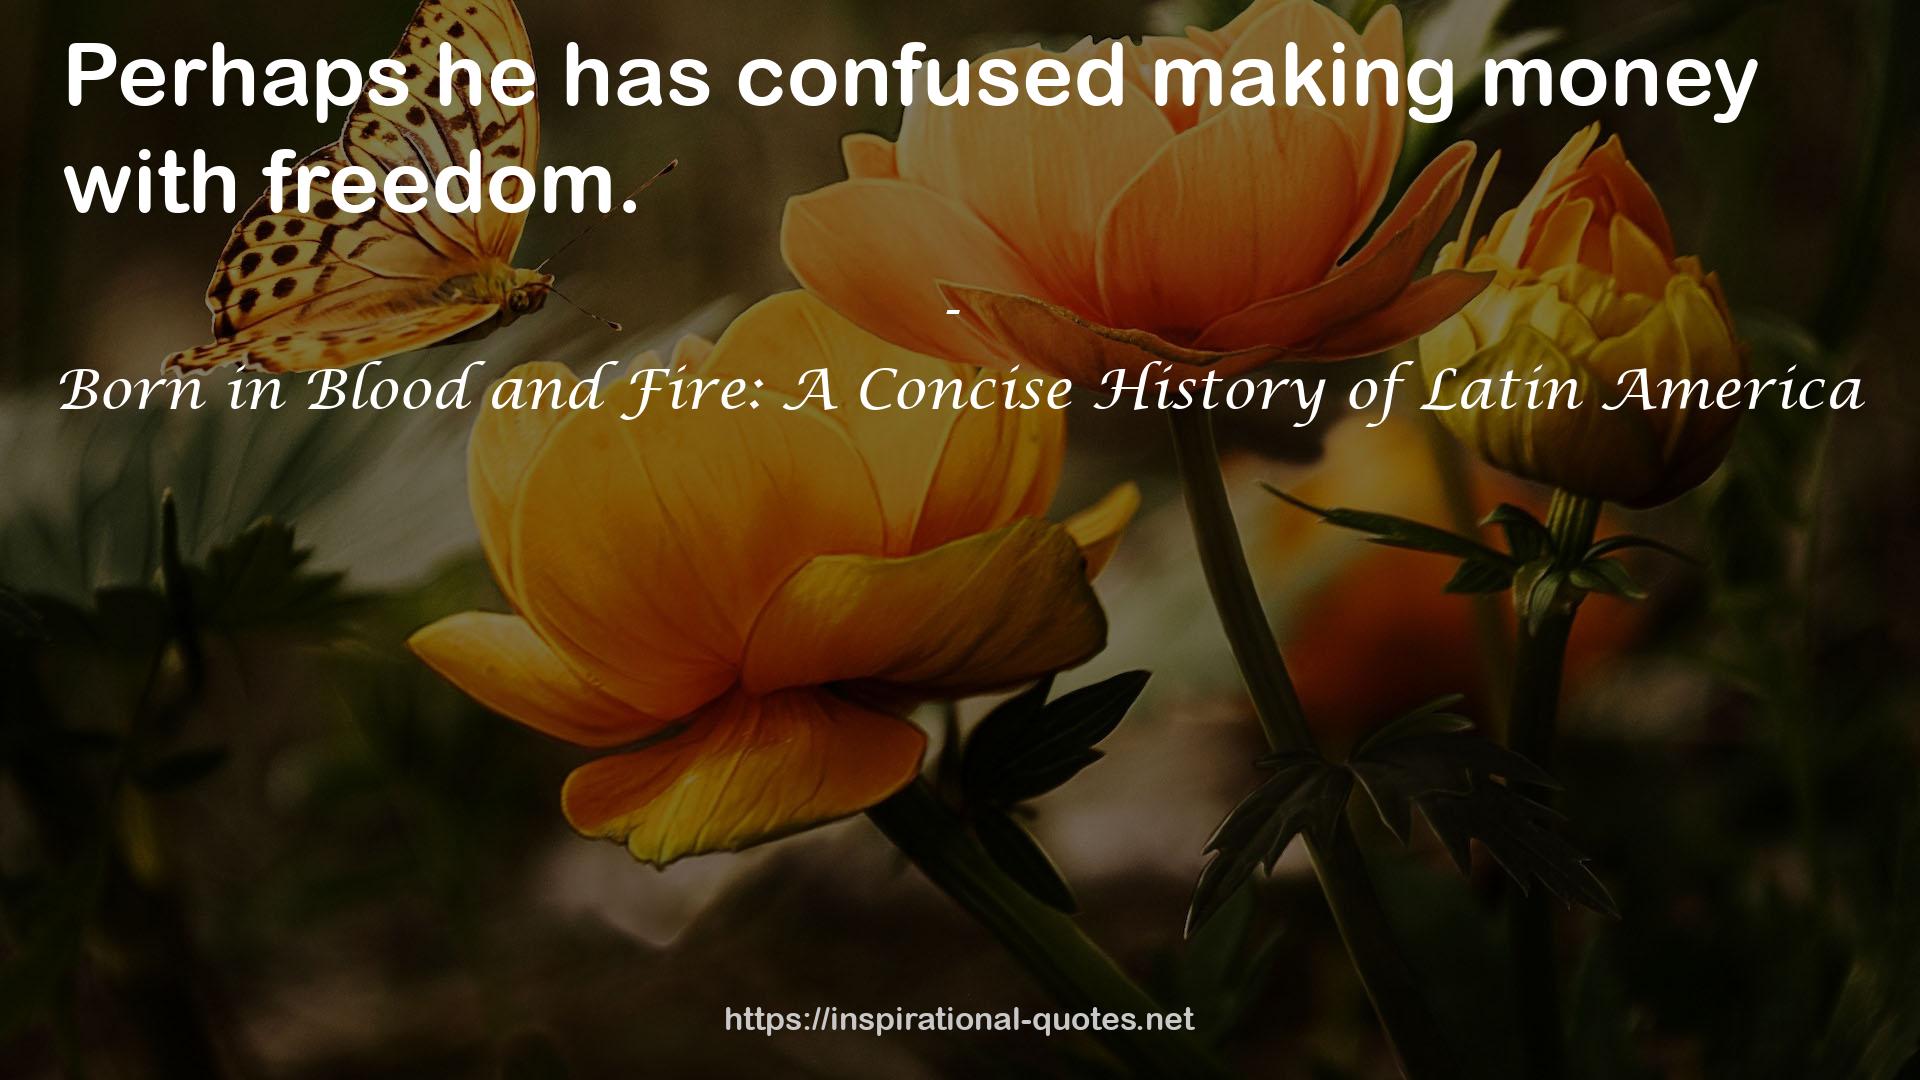 Born in Blood and Fire: A Concise History of Latin America QUOTES